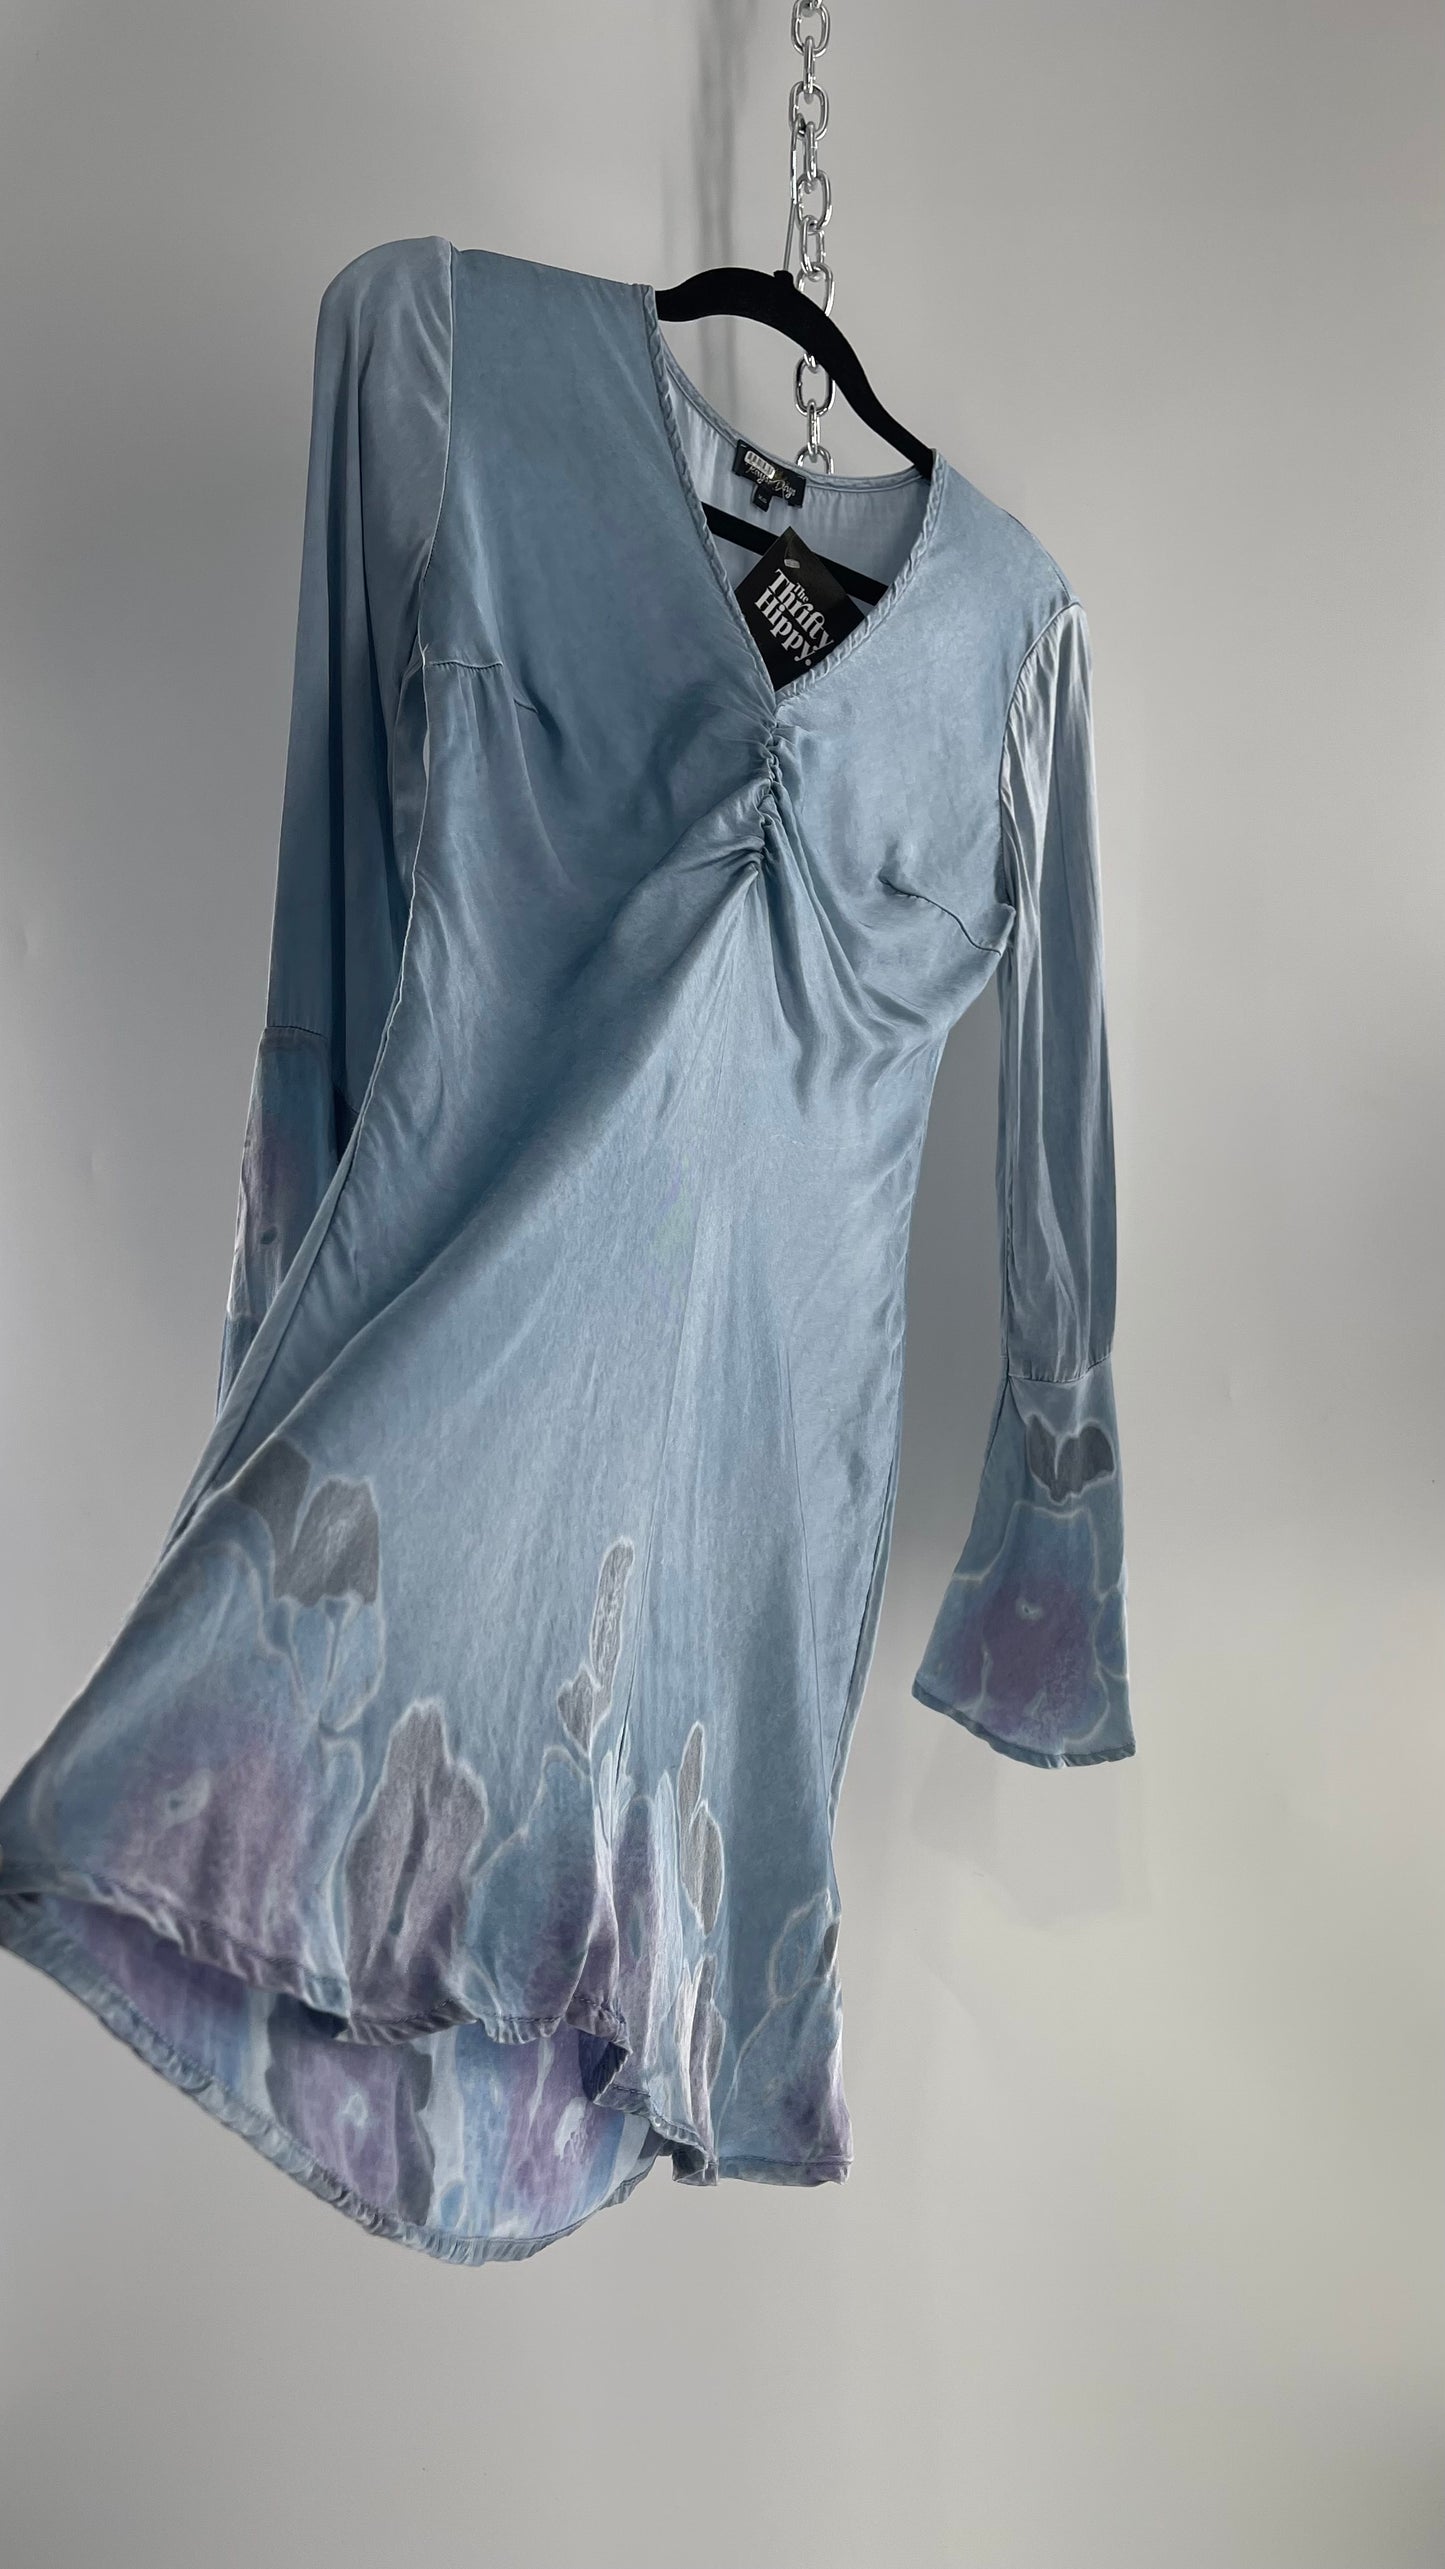 Rays for Days Powder Blue Silky Bell Sleeve Dress (XS)